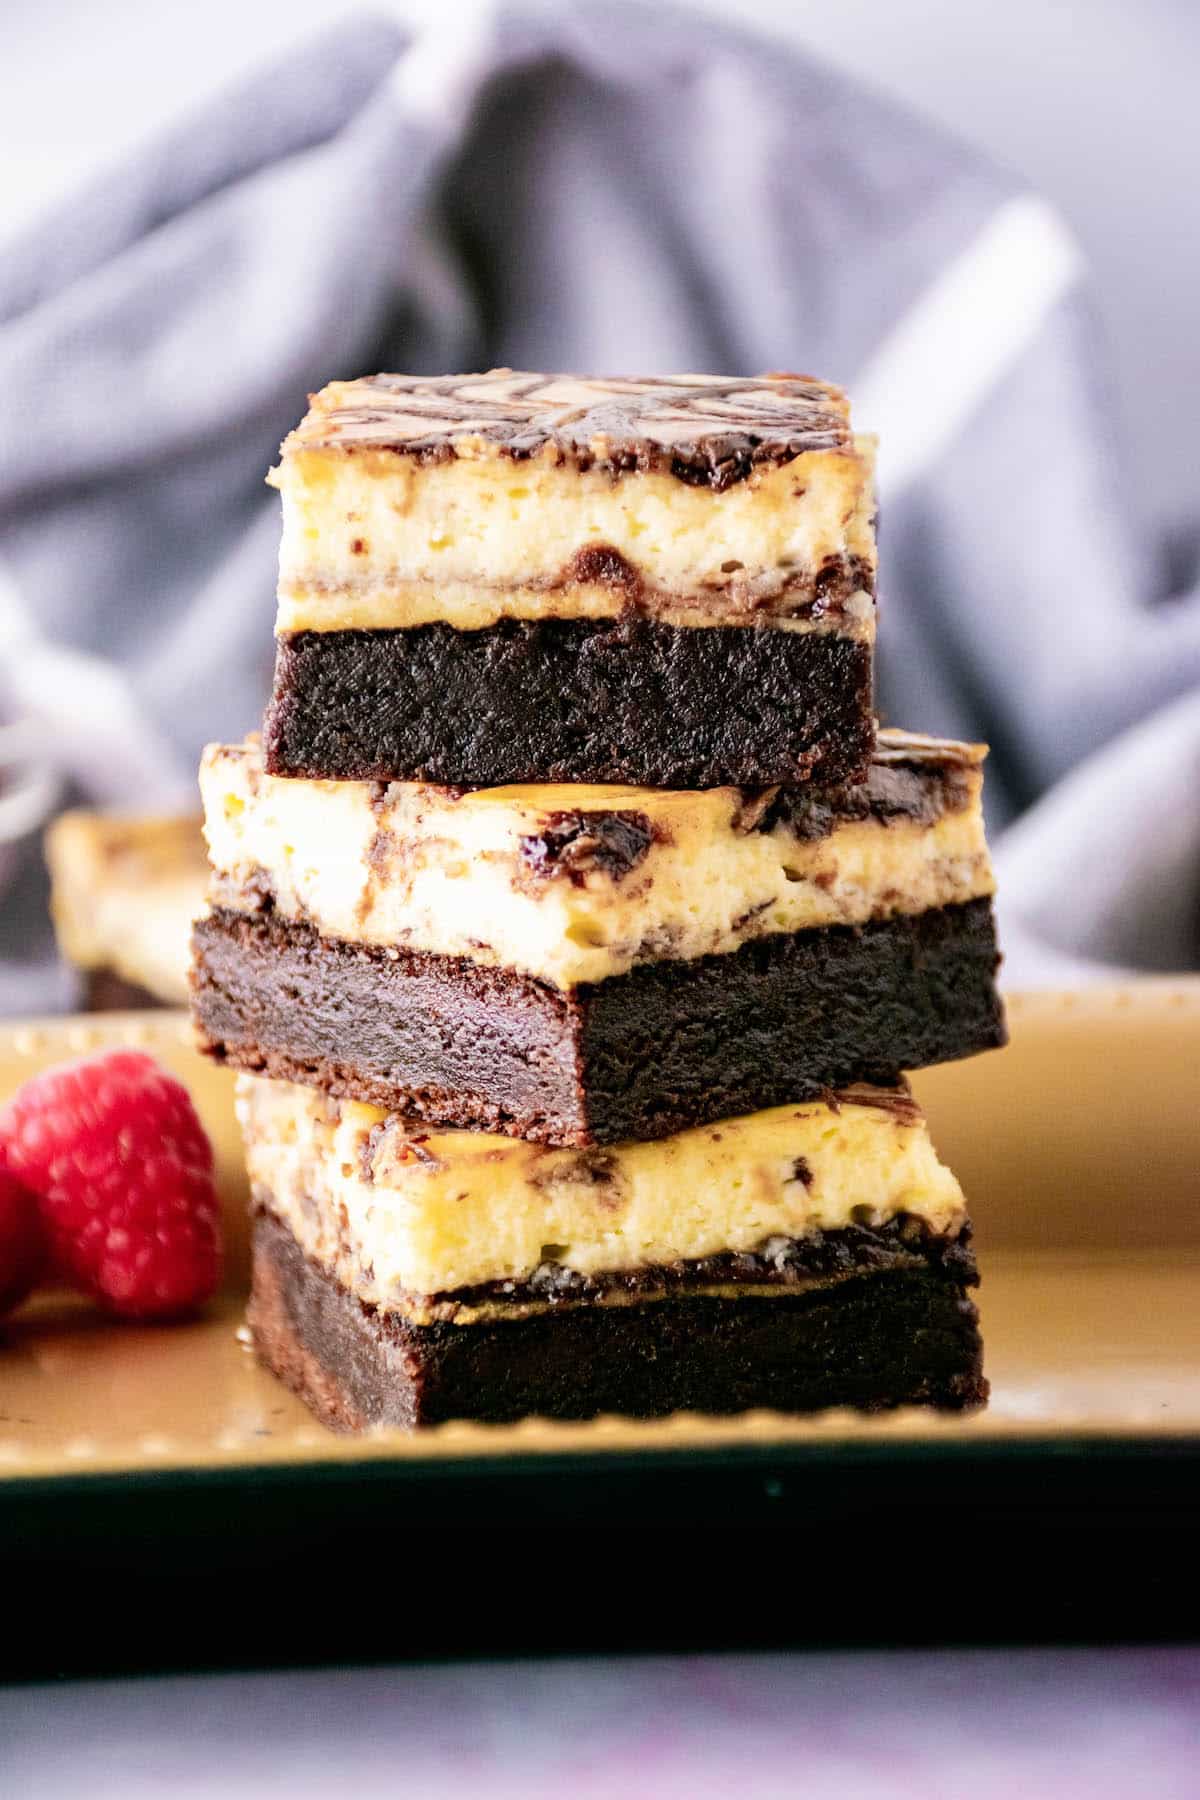 Nutella bars stacked on a light brown plate.